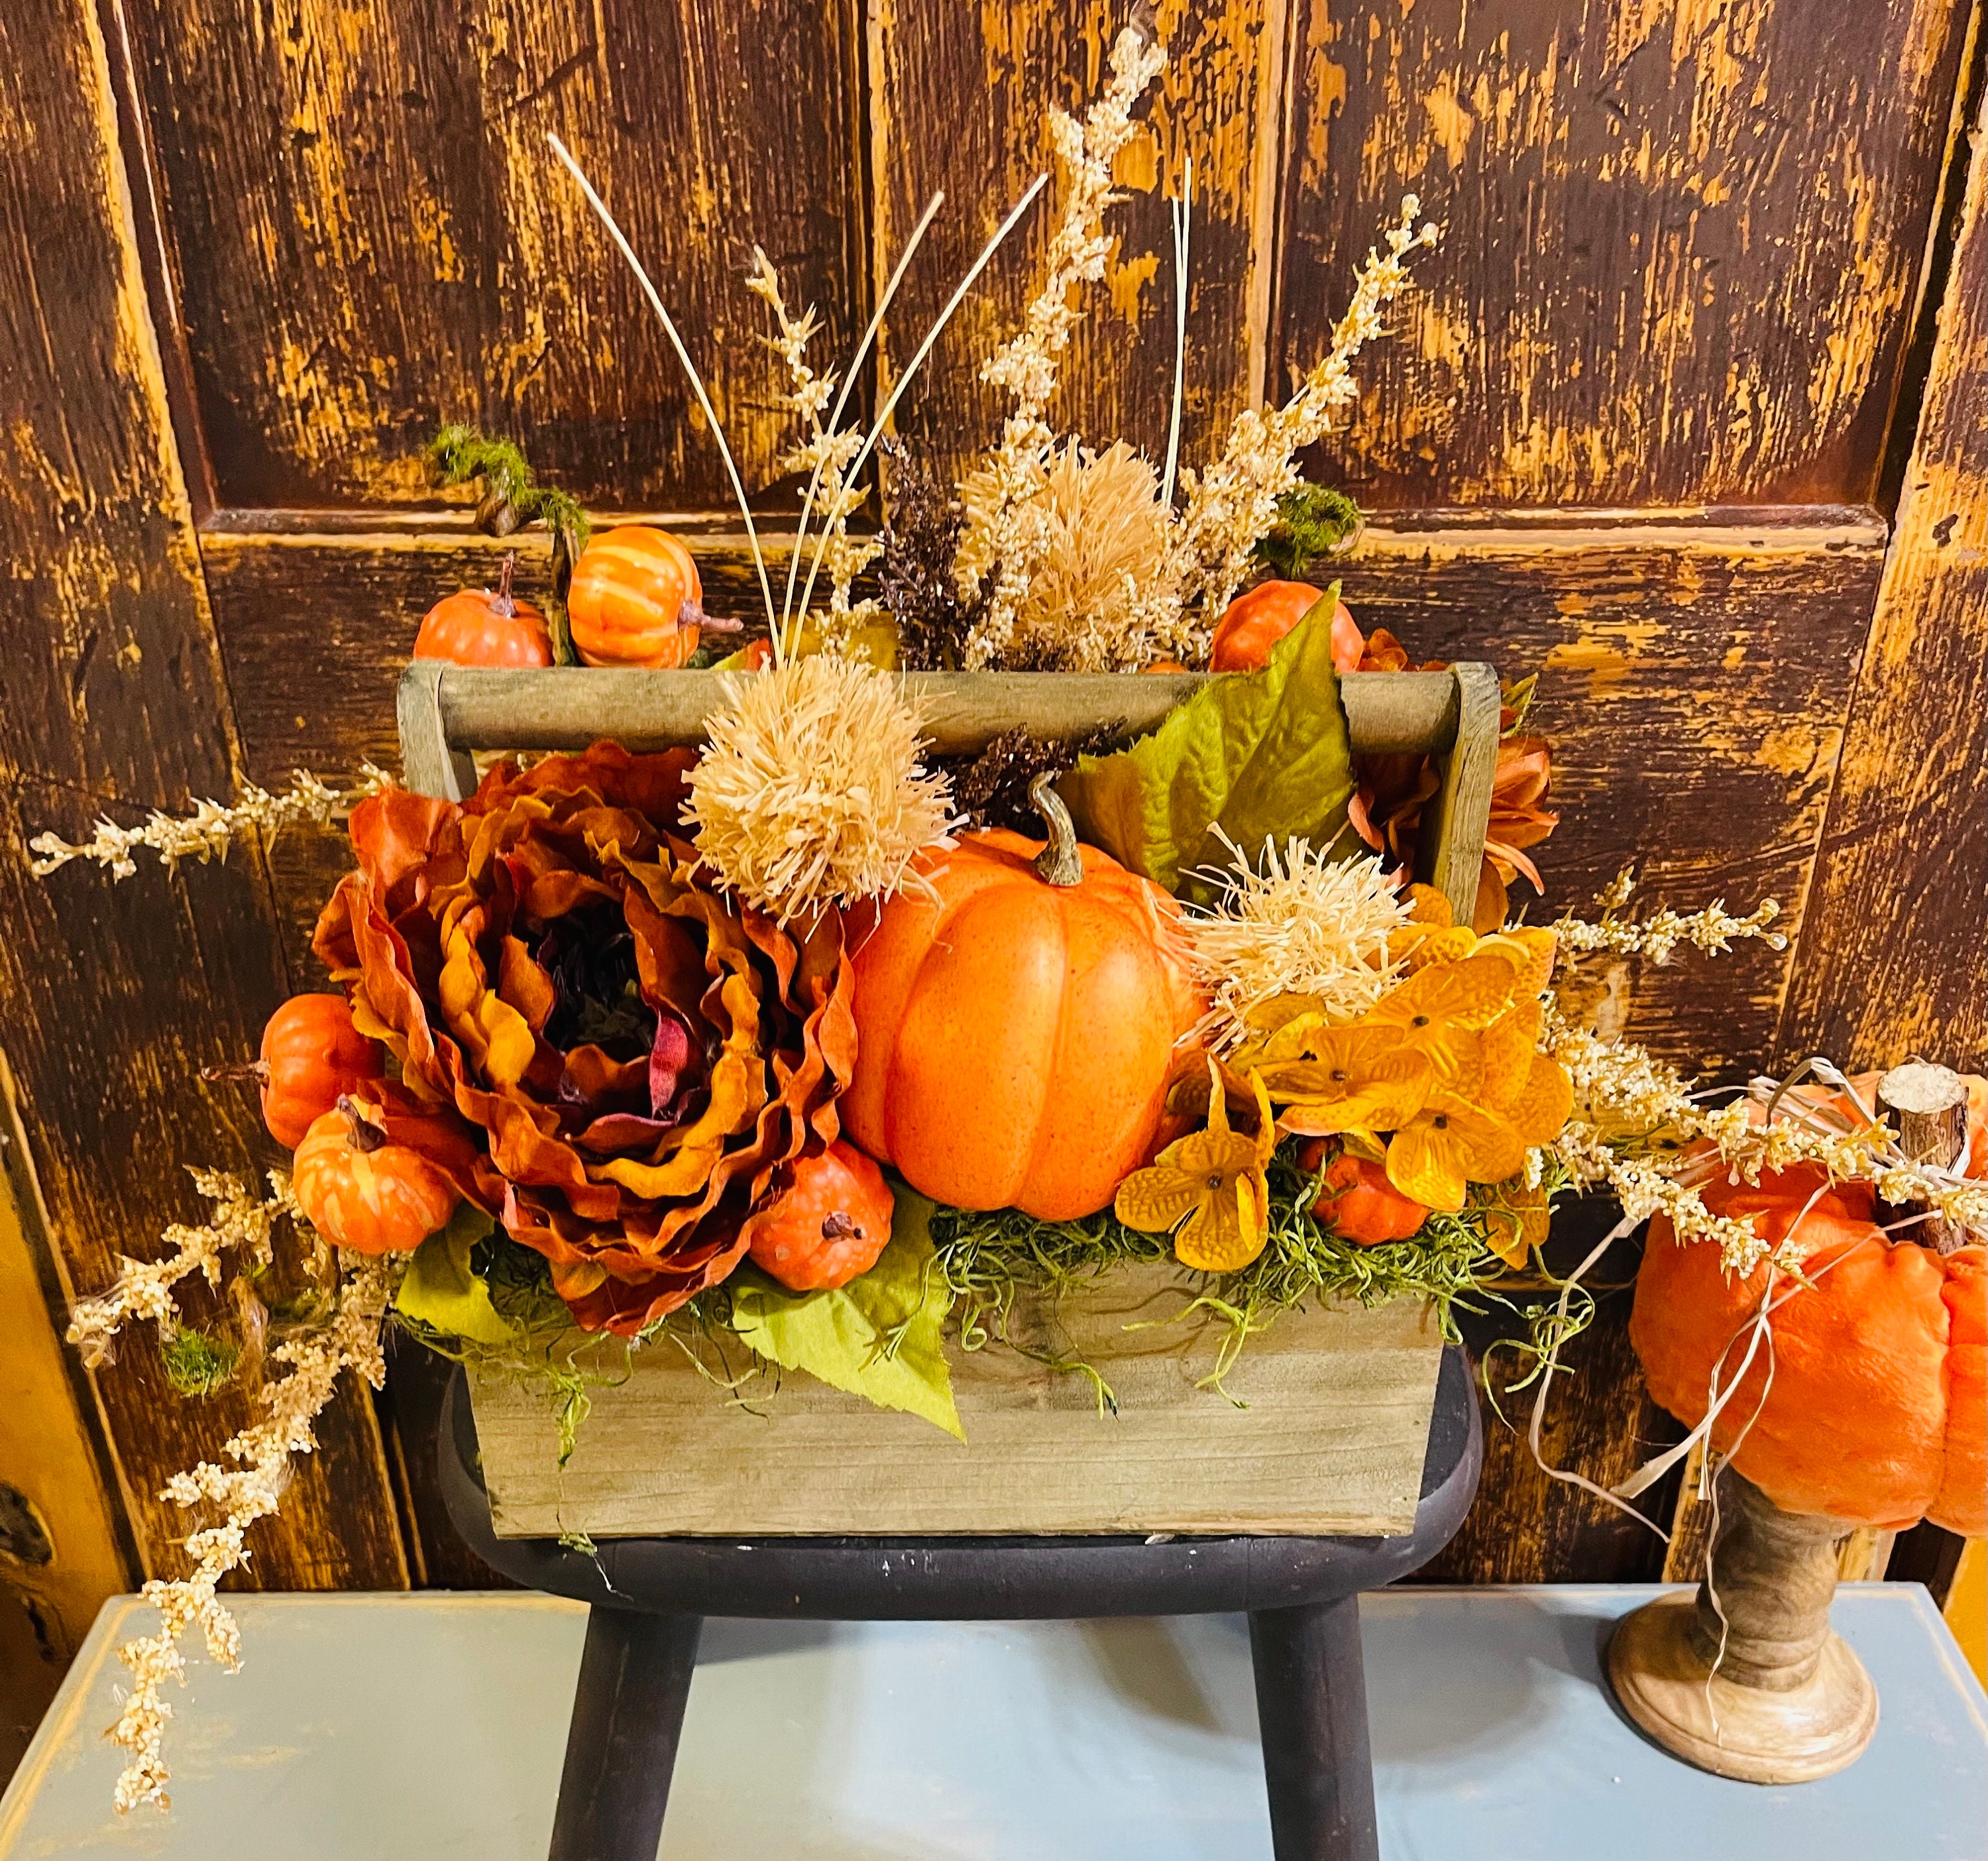 Pumpkin Basket for Fall Decor and a Table Centerpiece